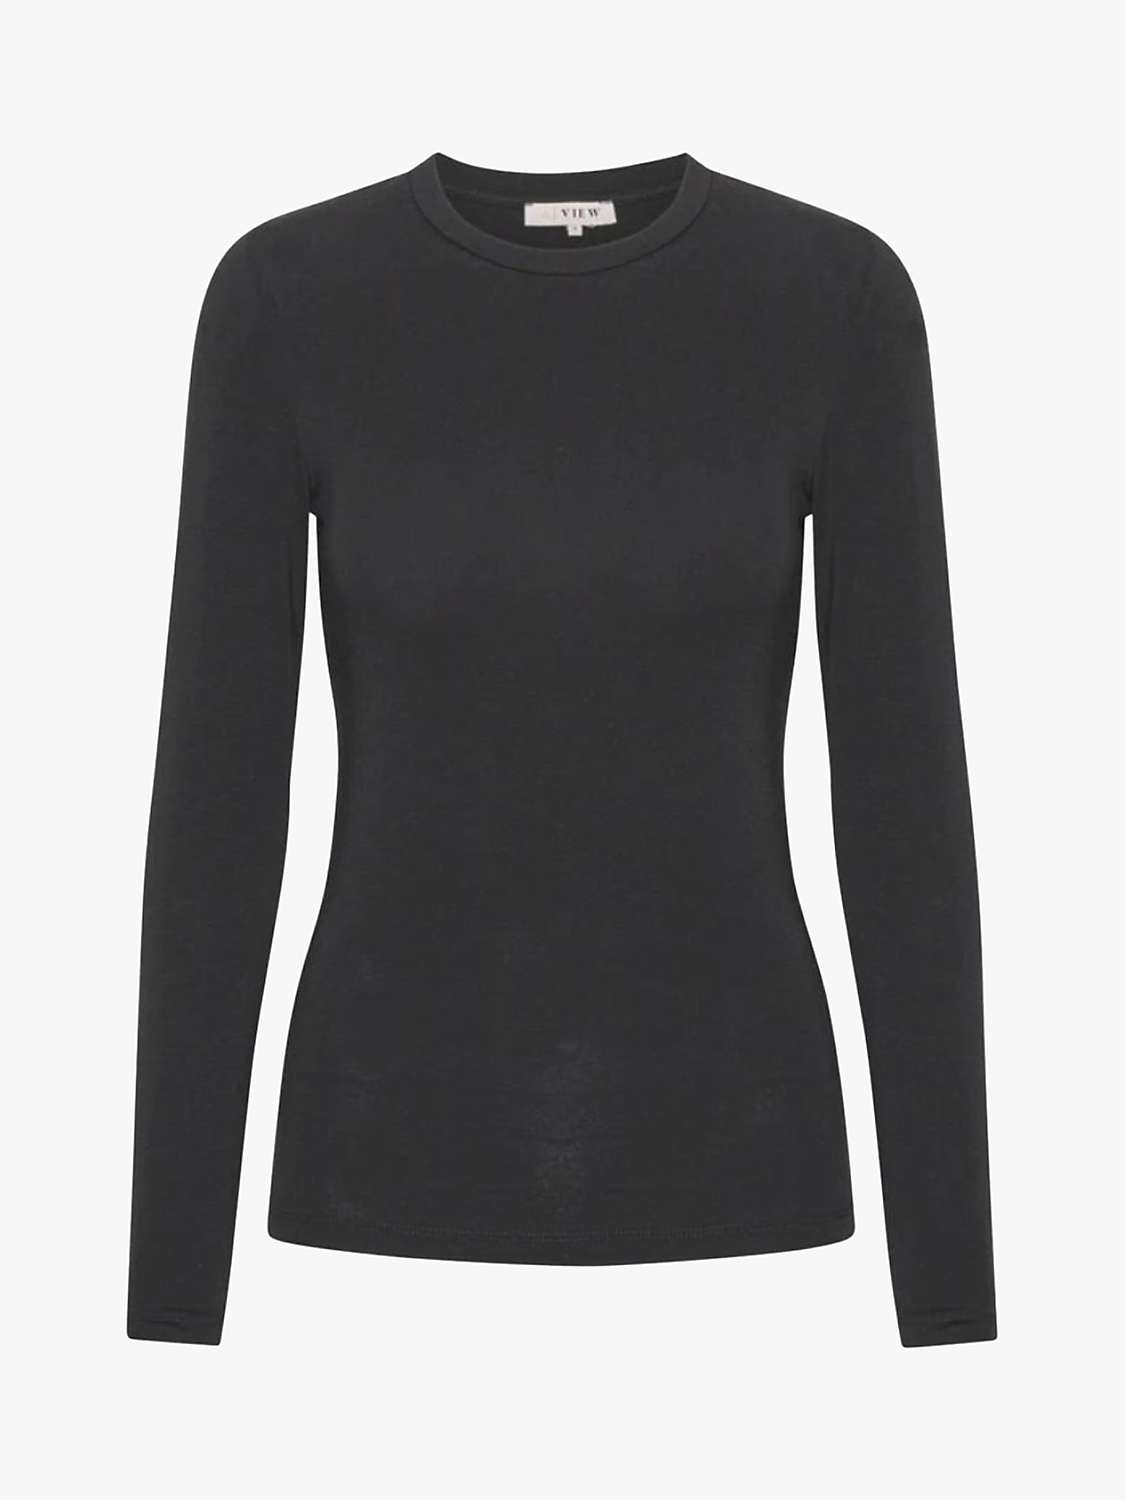 Buy A-VIEW Stabil Cotton Blend Long Sleeve Top Online at johnlewis.com